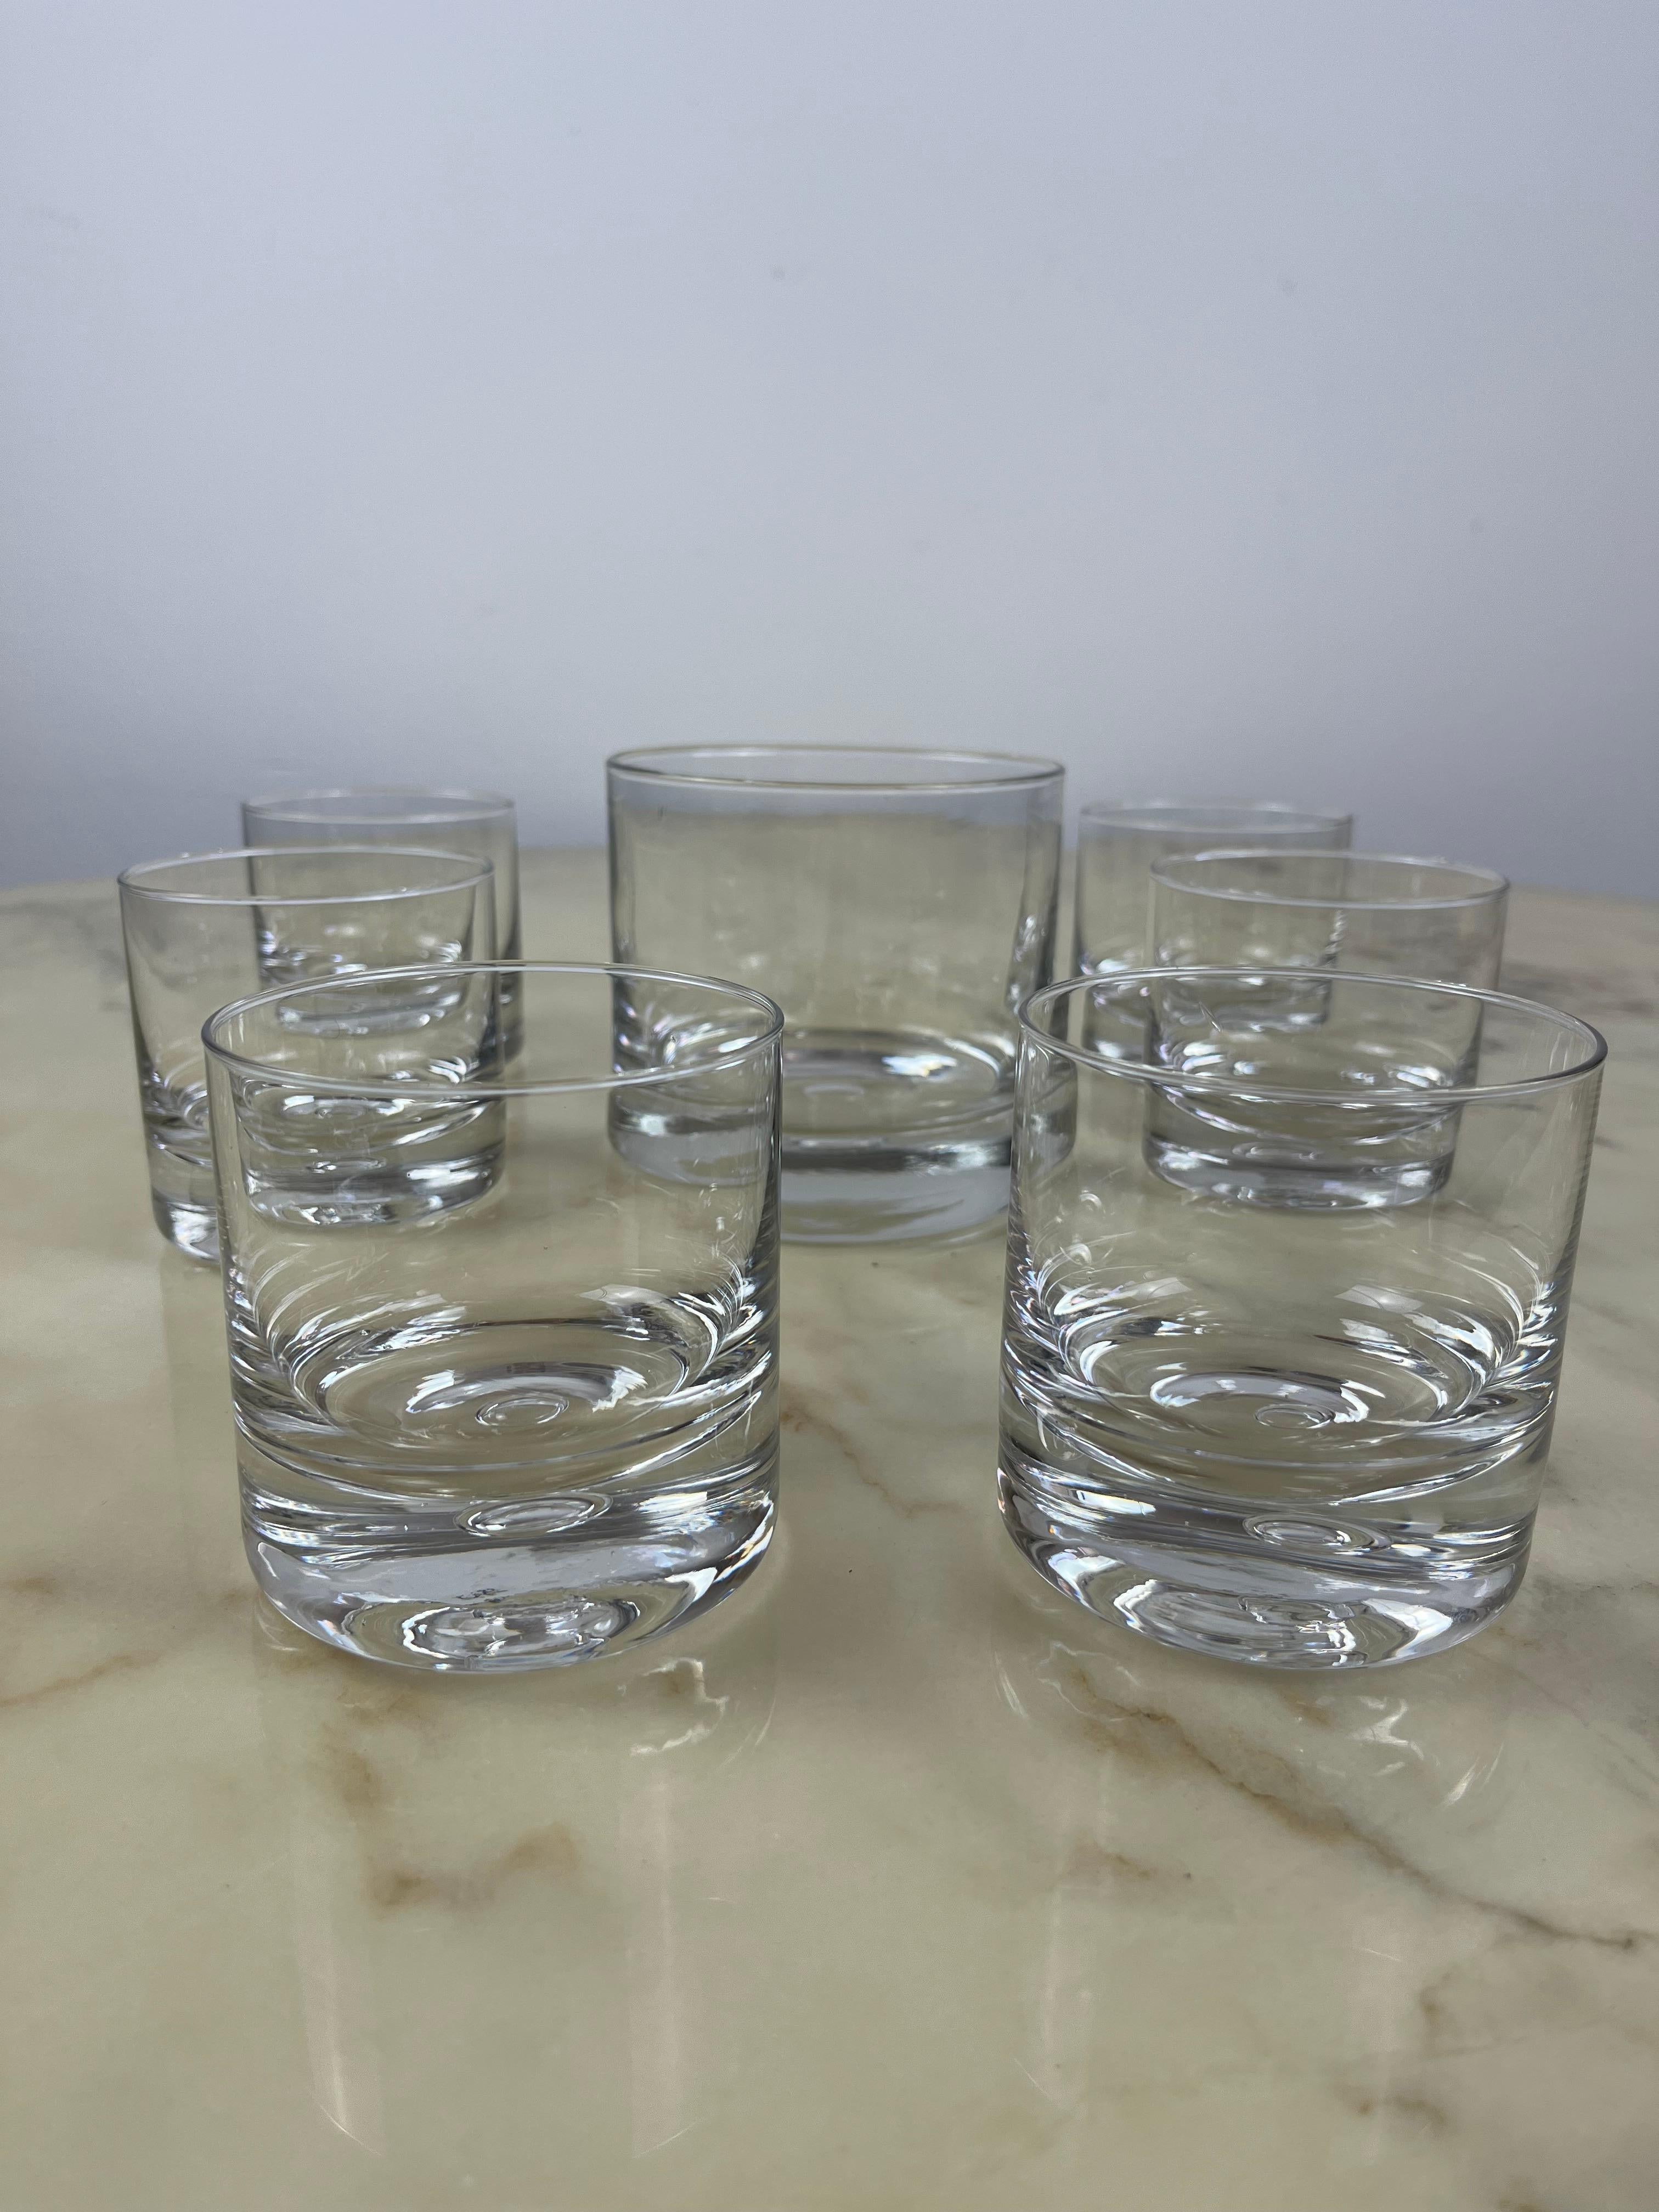 Whiskey set of six, lead crystal, Italy, 1980s.
The set consists of an ice bucket (diameter 11.5 cm and height 10.5 cm) and six glasses (each diameter 8 cm and height 9 cm).
The service is intact.
It has always belonged to my family.